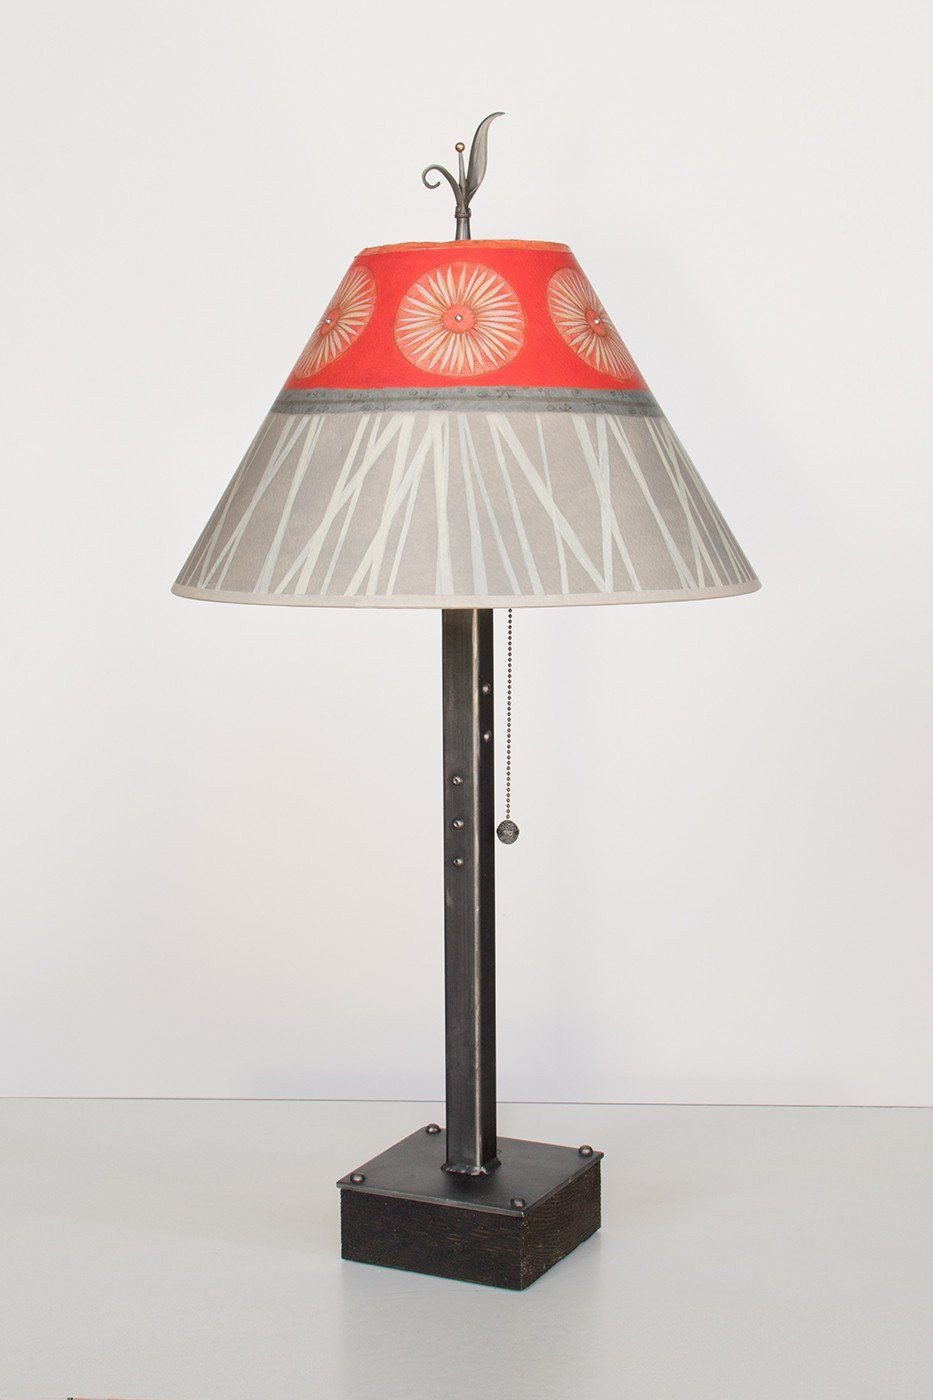 Steel Table Lamp on Wood with Medium Conical Shade in Tang - Lit